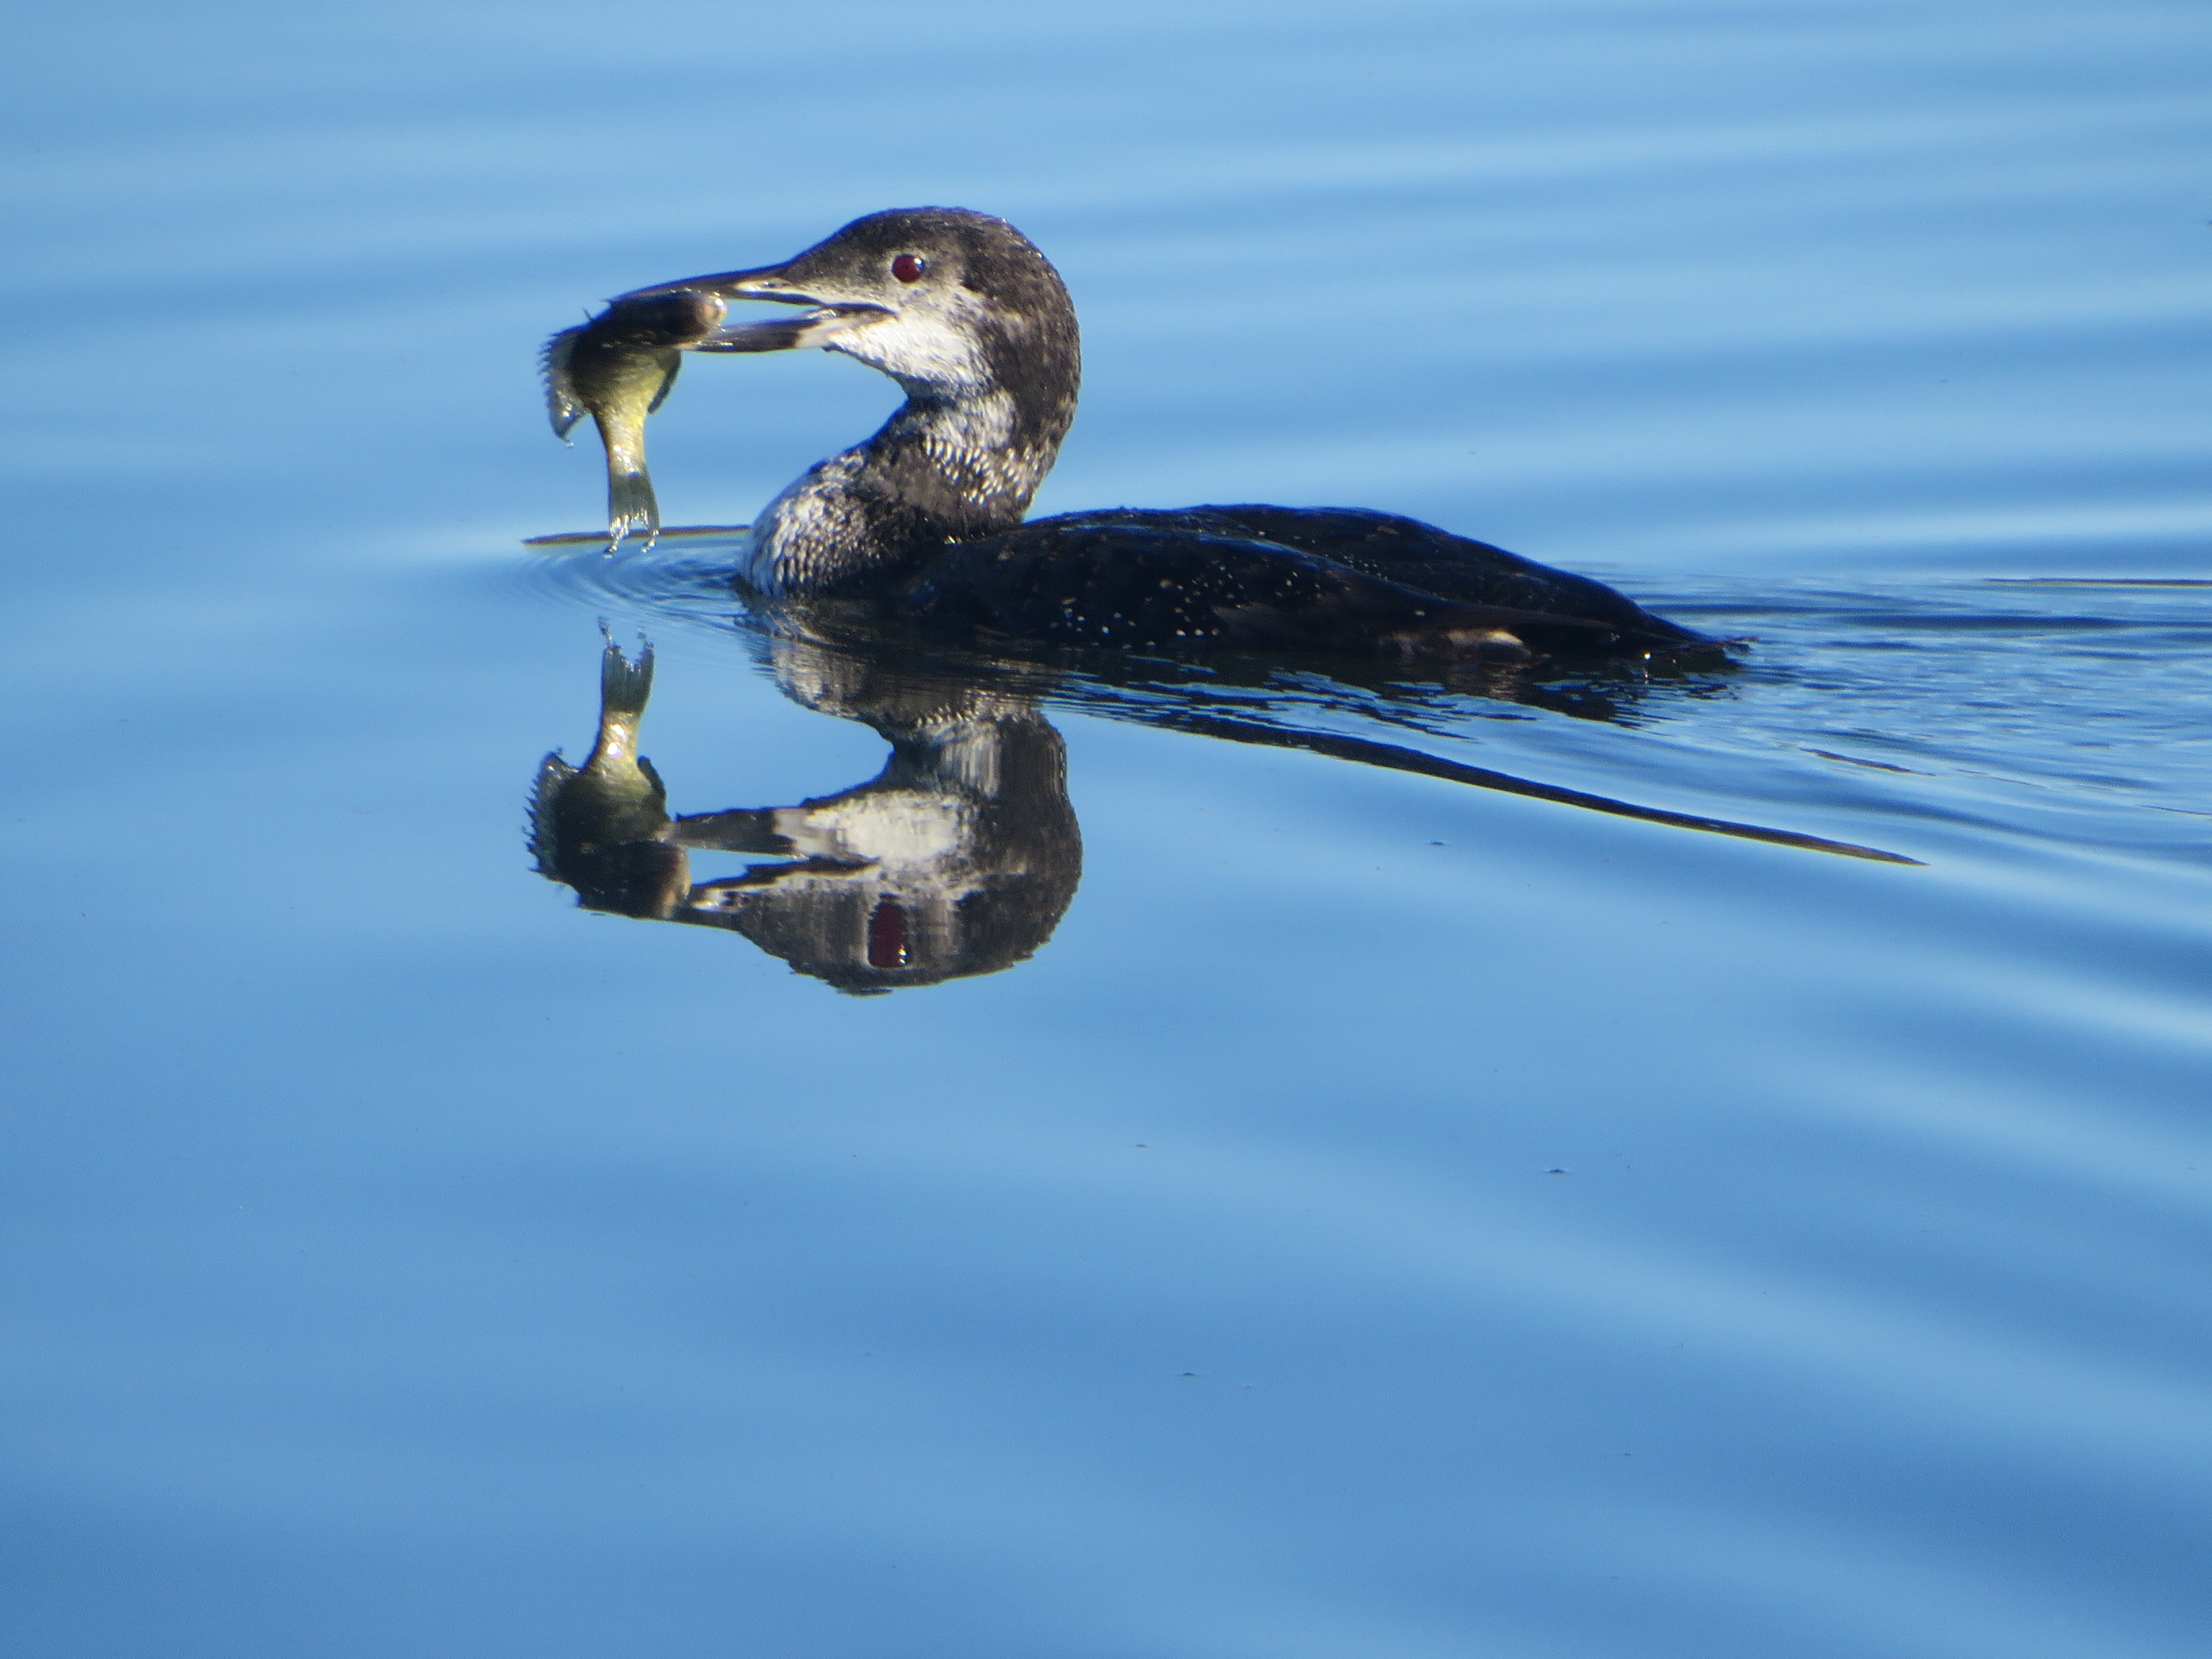 Loon with a fish in it's beak